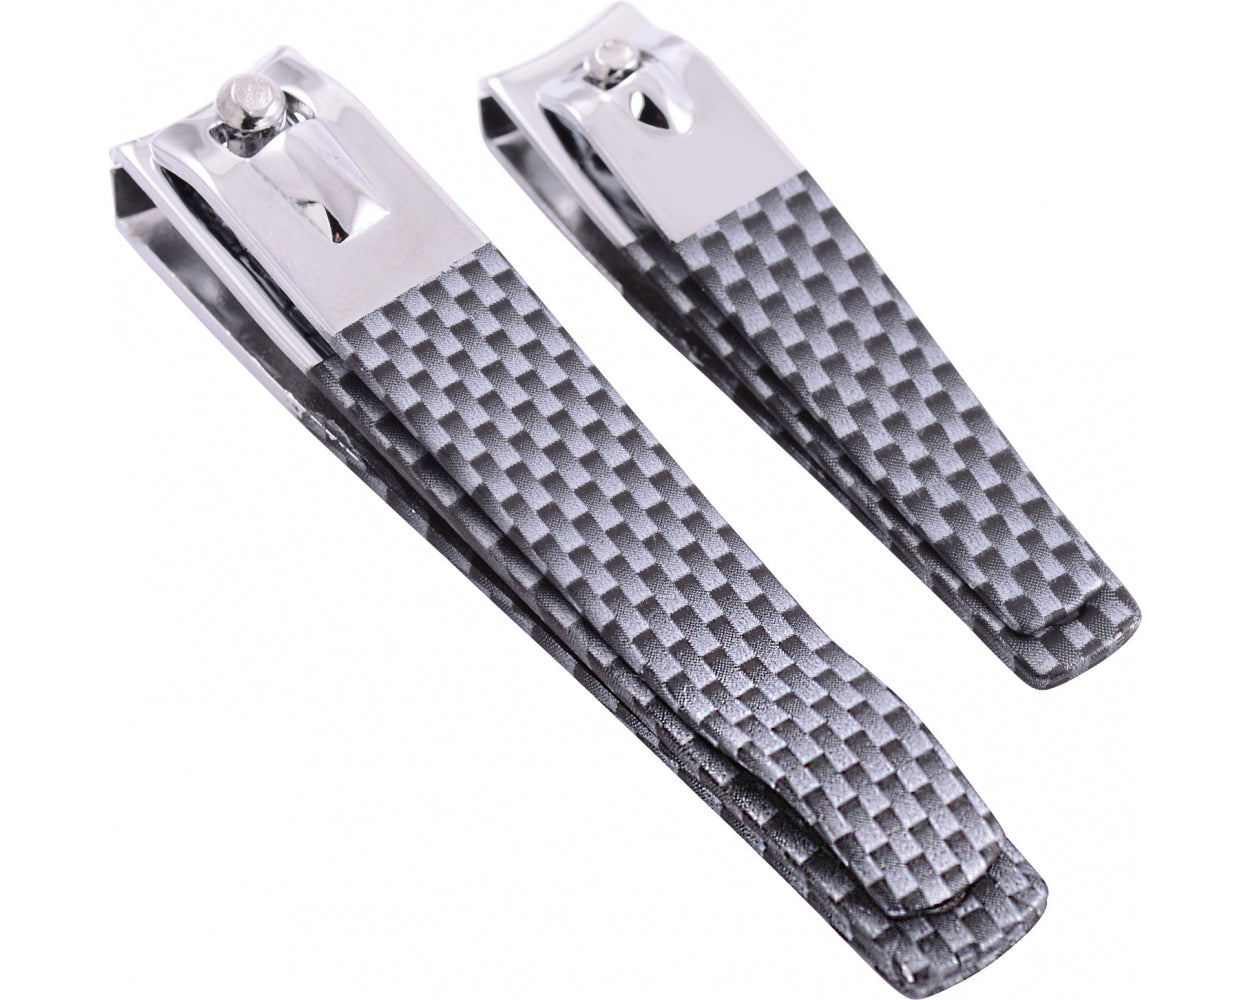 Nail Clippers - Carbon Fiber Styling